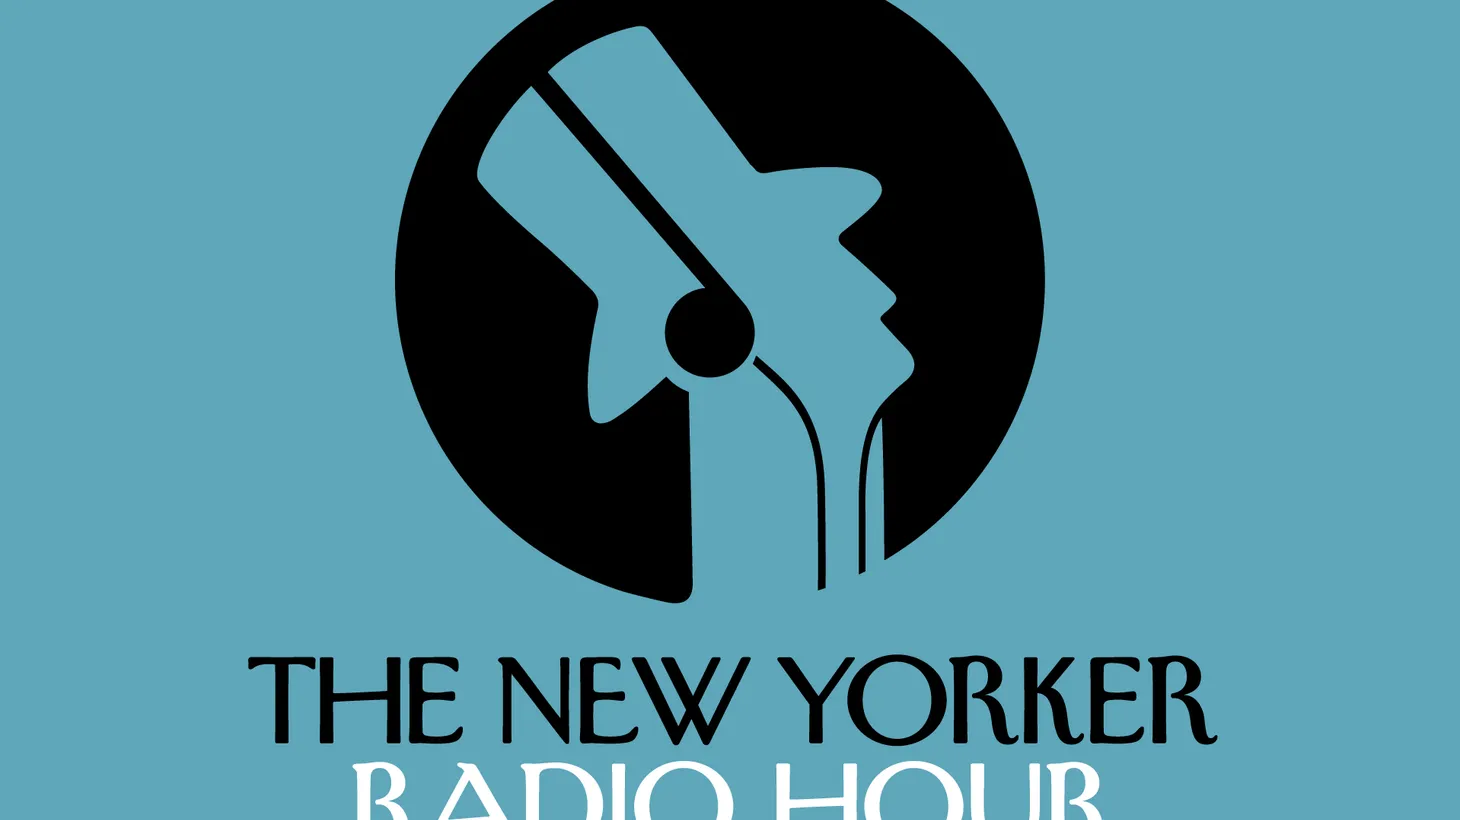 This week on the New Yorker Radio Hour, David Remnick talks with playwright Lynn Nottage, whose play Sweat has been called the first theatrical landmark of the Trump era.